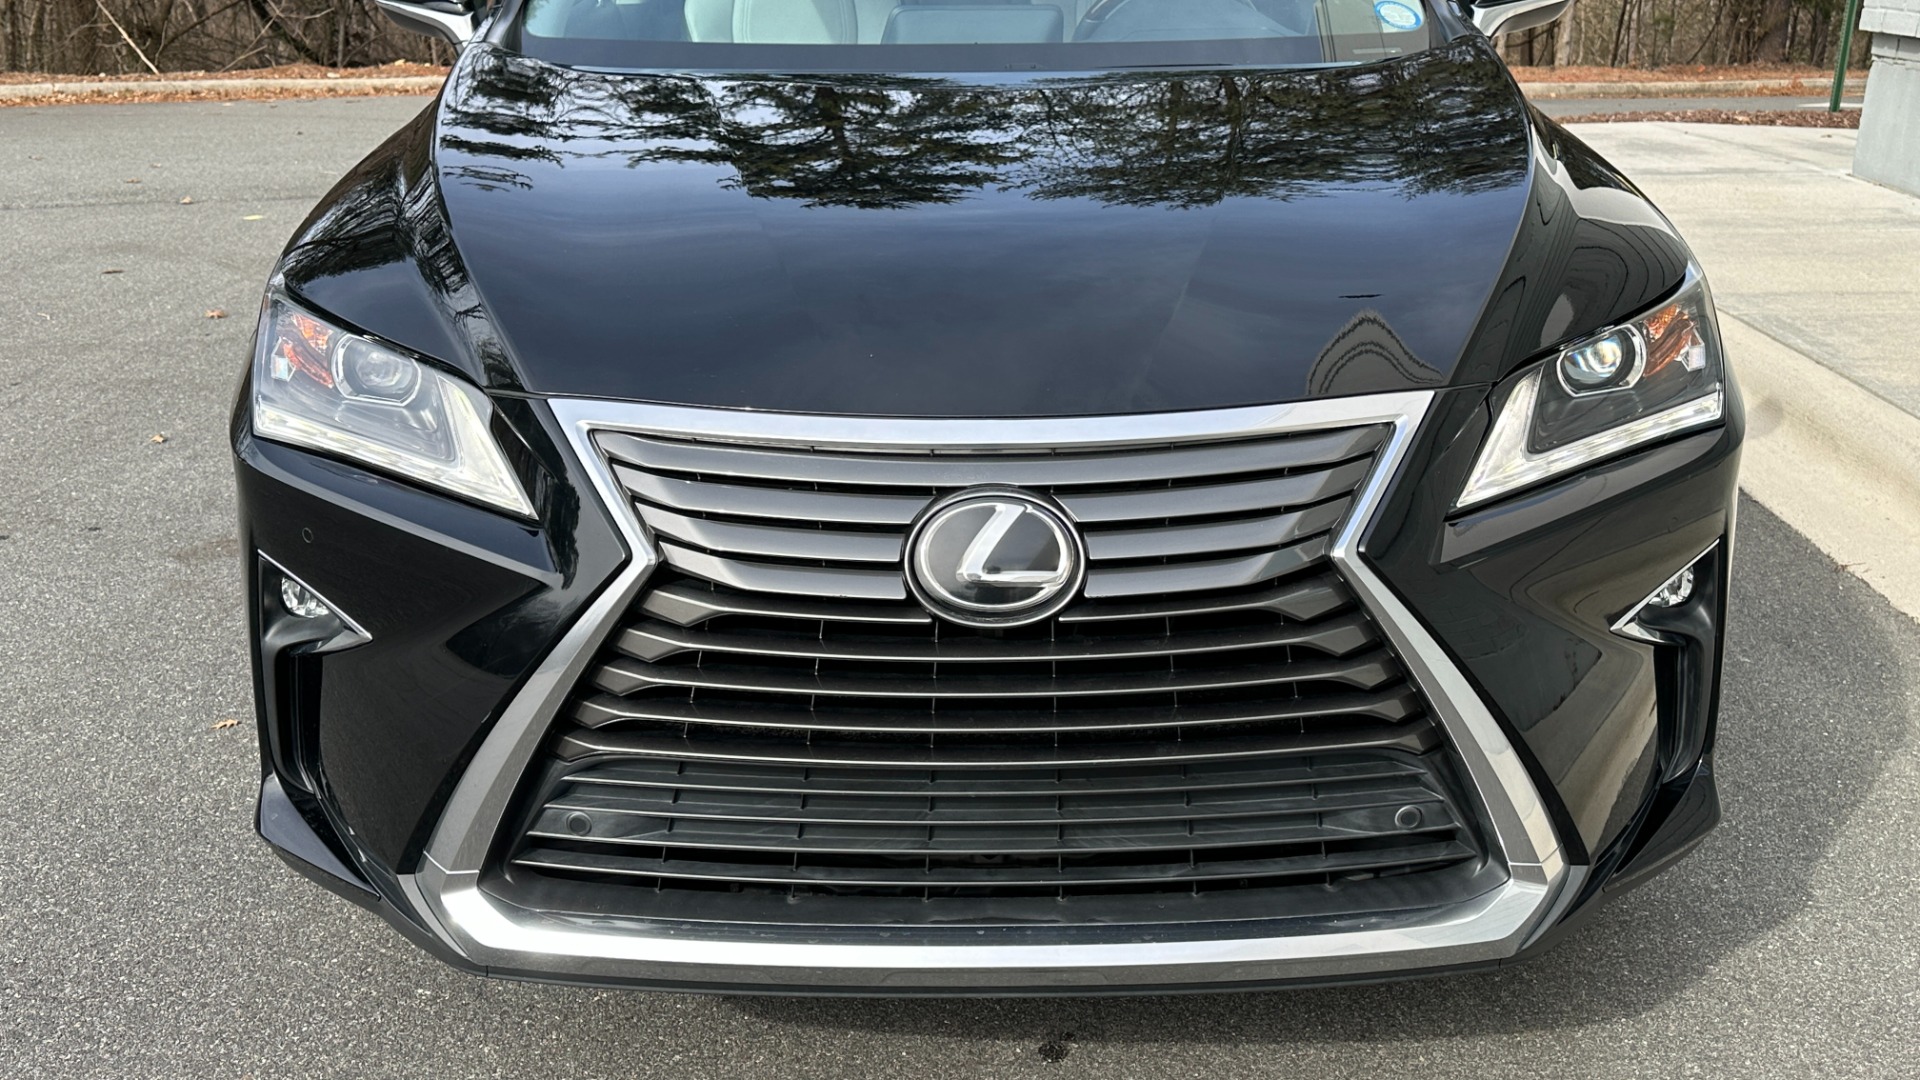 Used 2018 Lexus RX 350 3.5L V6 / PREMIUM / BLIND SPOT MONITOR / VENT STS / REARVIEW for sale $40,995 at Formula Imports in Charlotte NC 28227 44